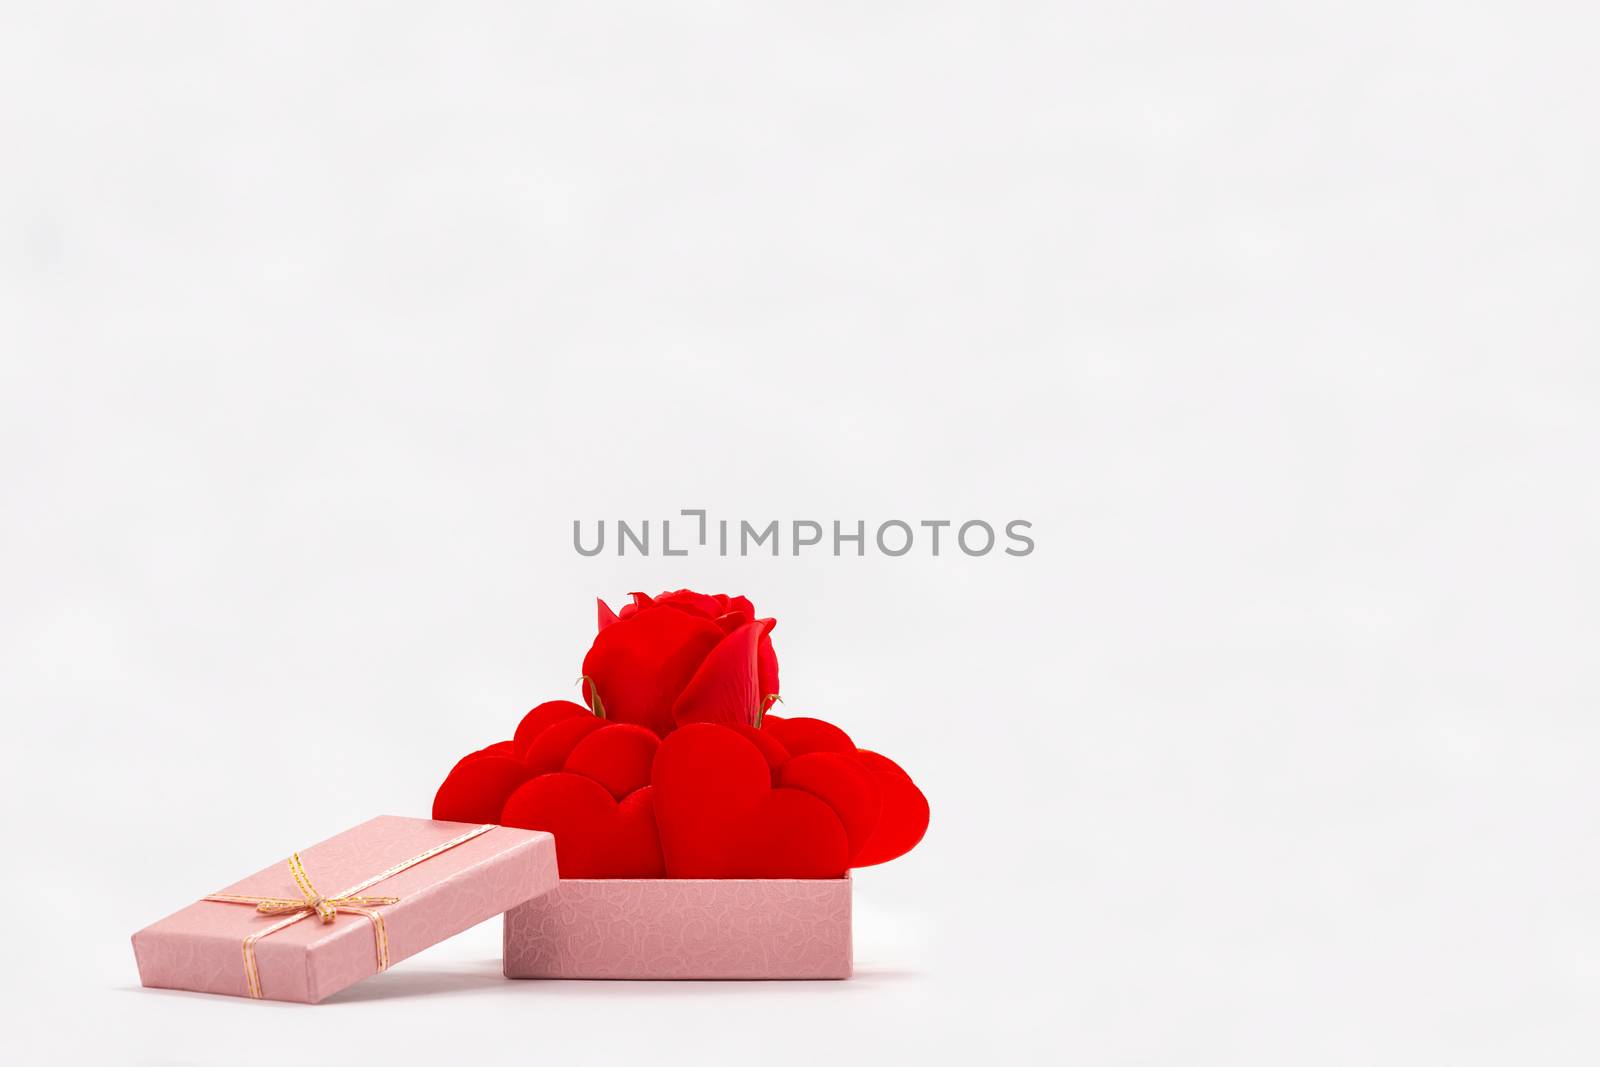 Front View of Rose and Red Hearts in Pink Gift Box. Isolated on White Background. Valentines Day Theme. Symbol of Love and Friendship.